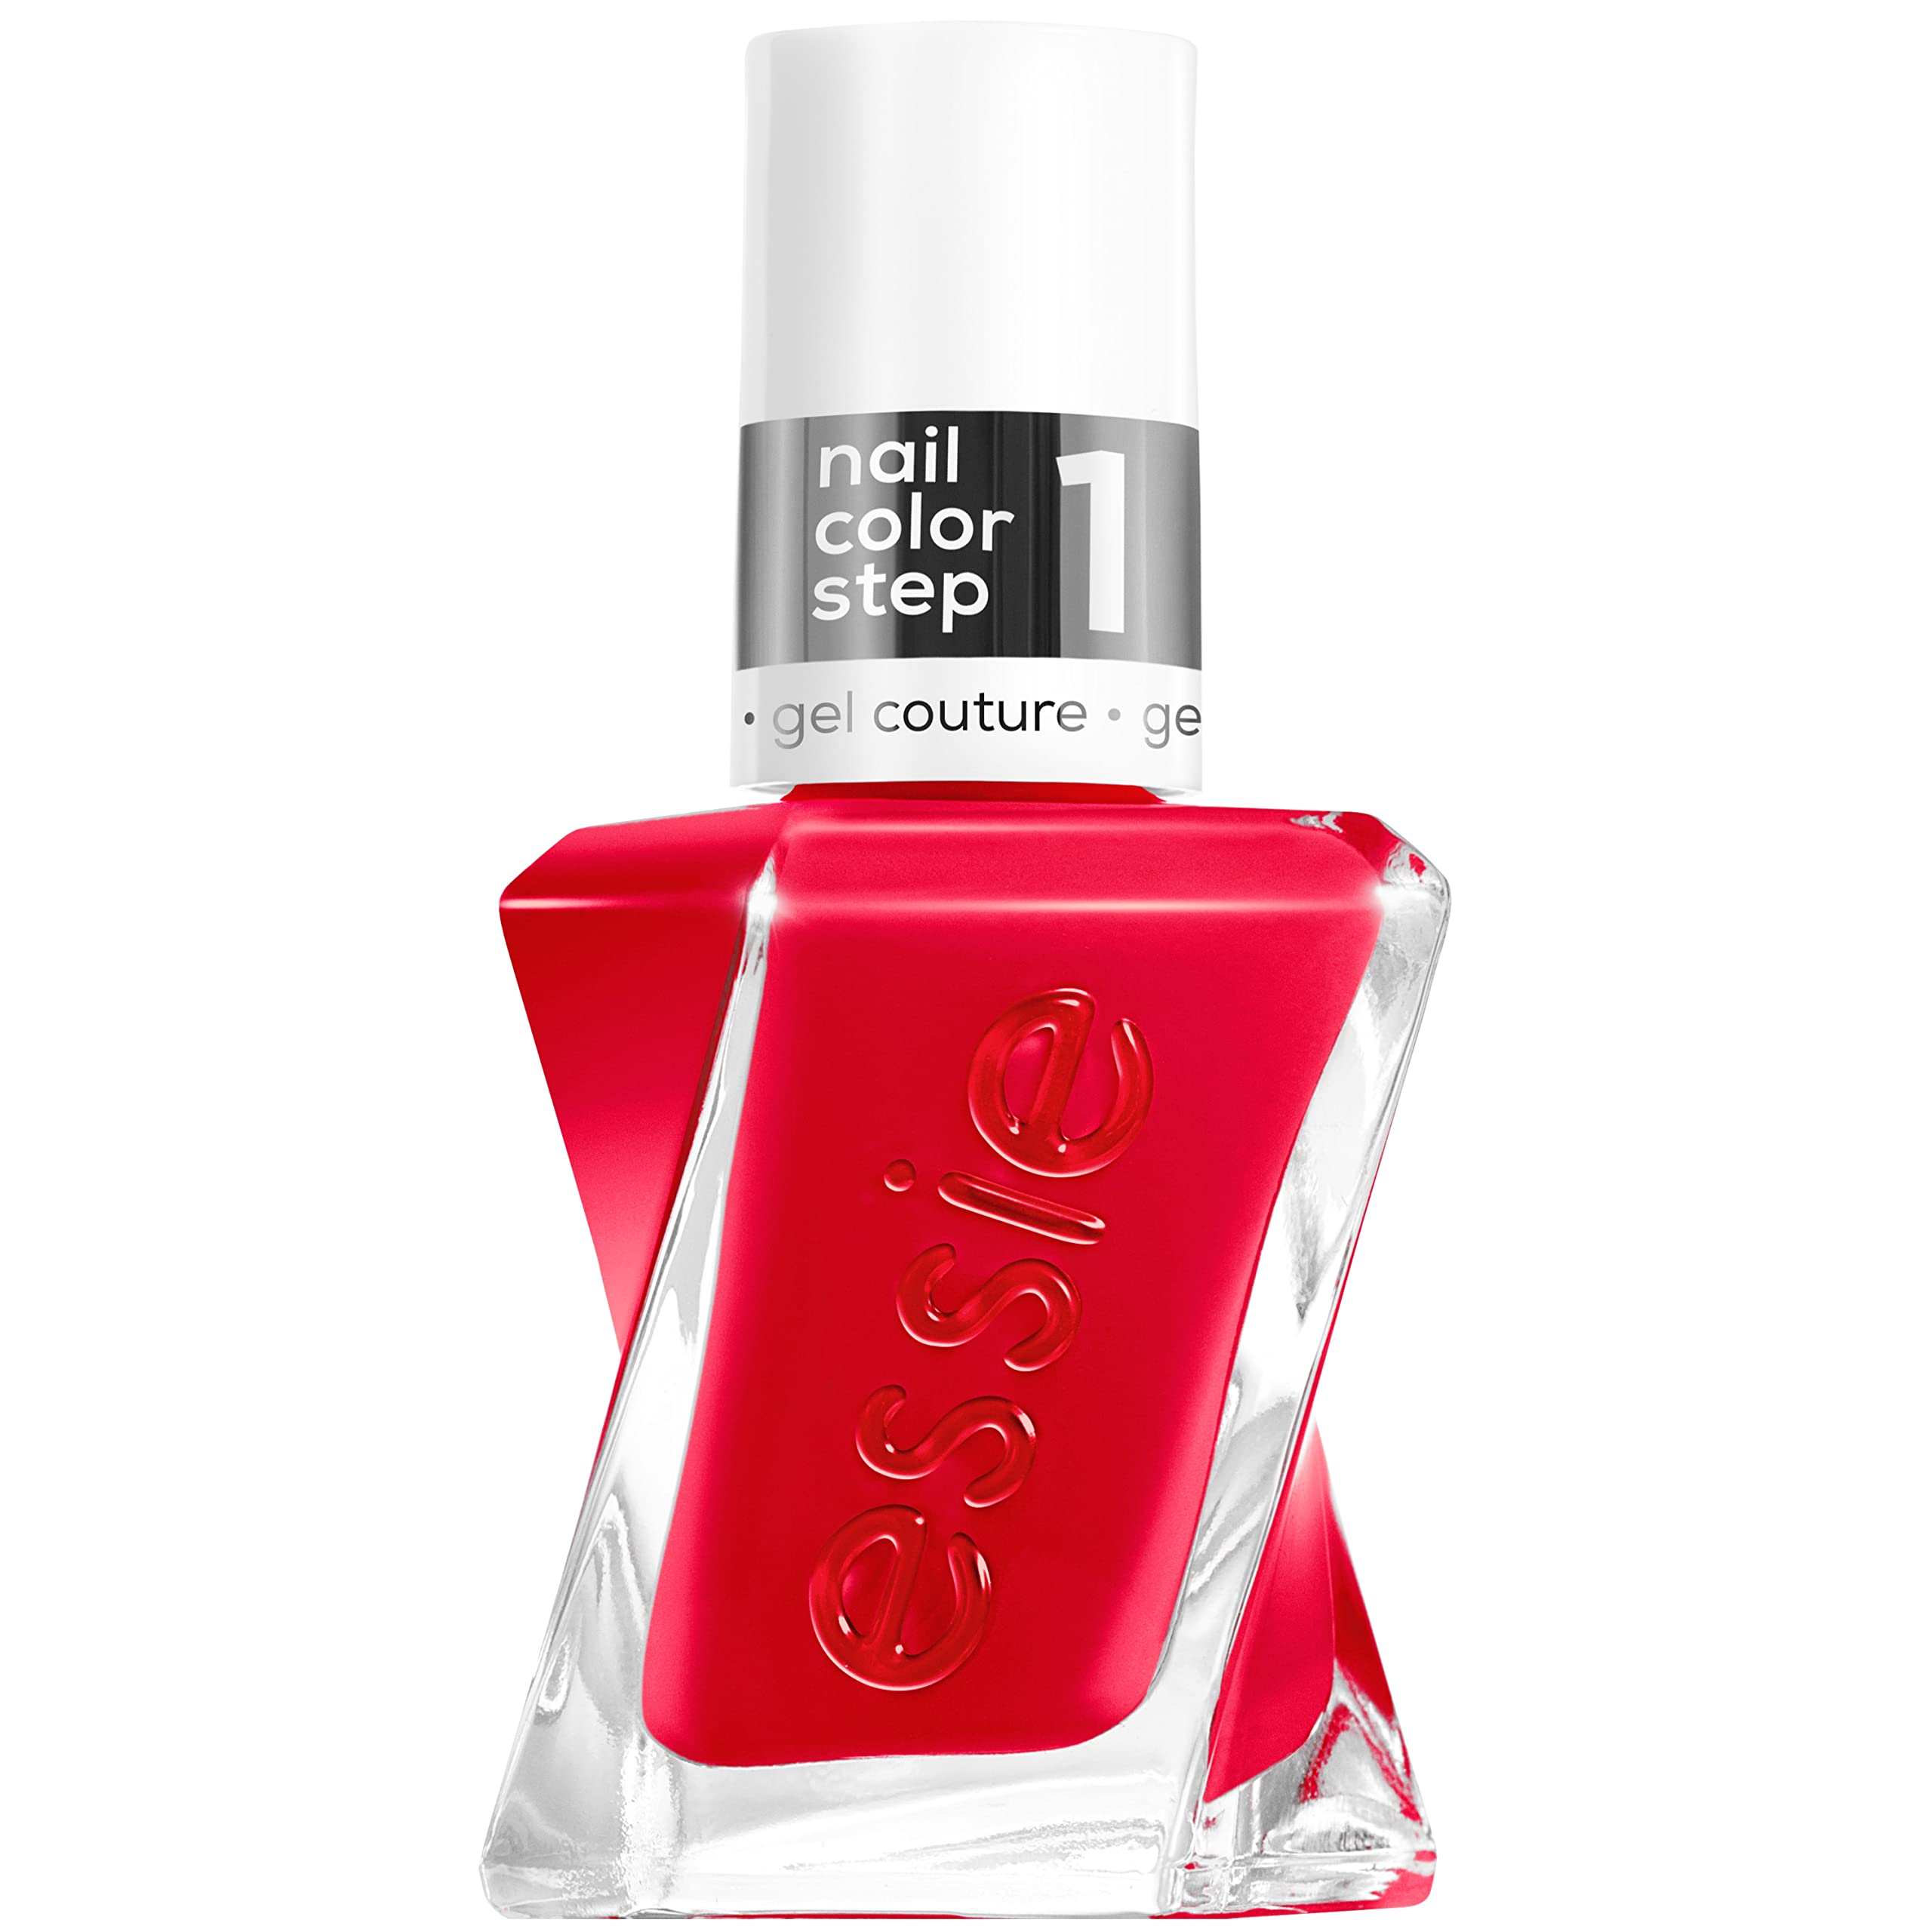  Essie Gel Couture Long-Lasting Nail Polish, 8-Free Vegan,  Scarlet Red, Rock The Runway, 0.46 fl oz : Beauty & Personal Care